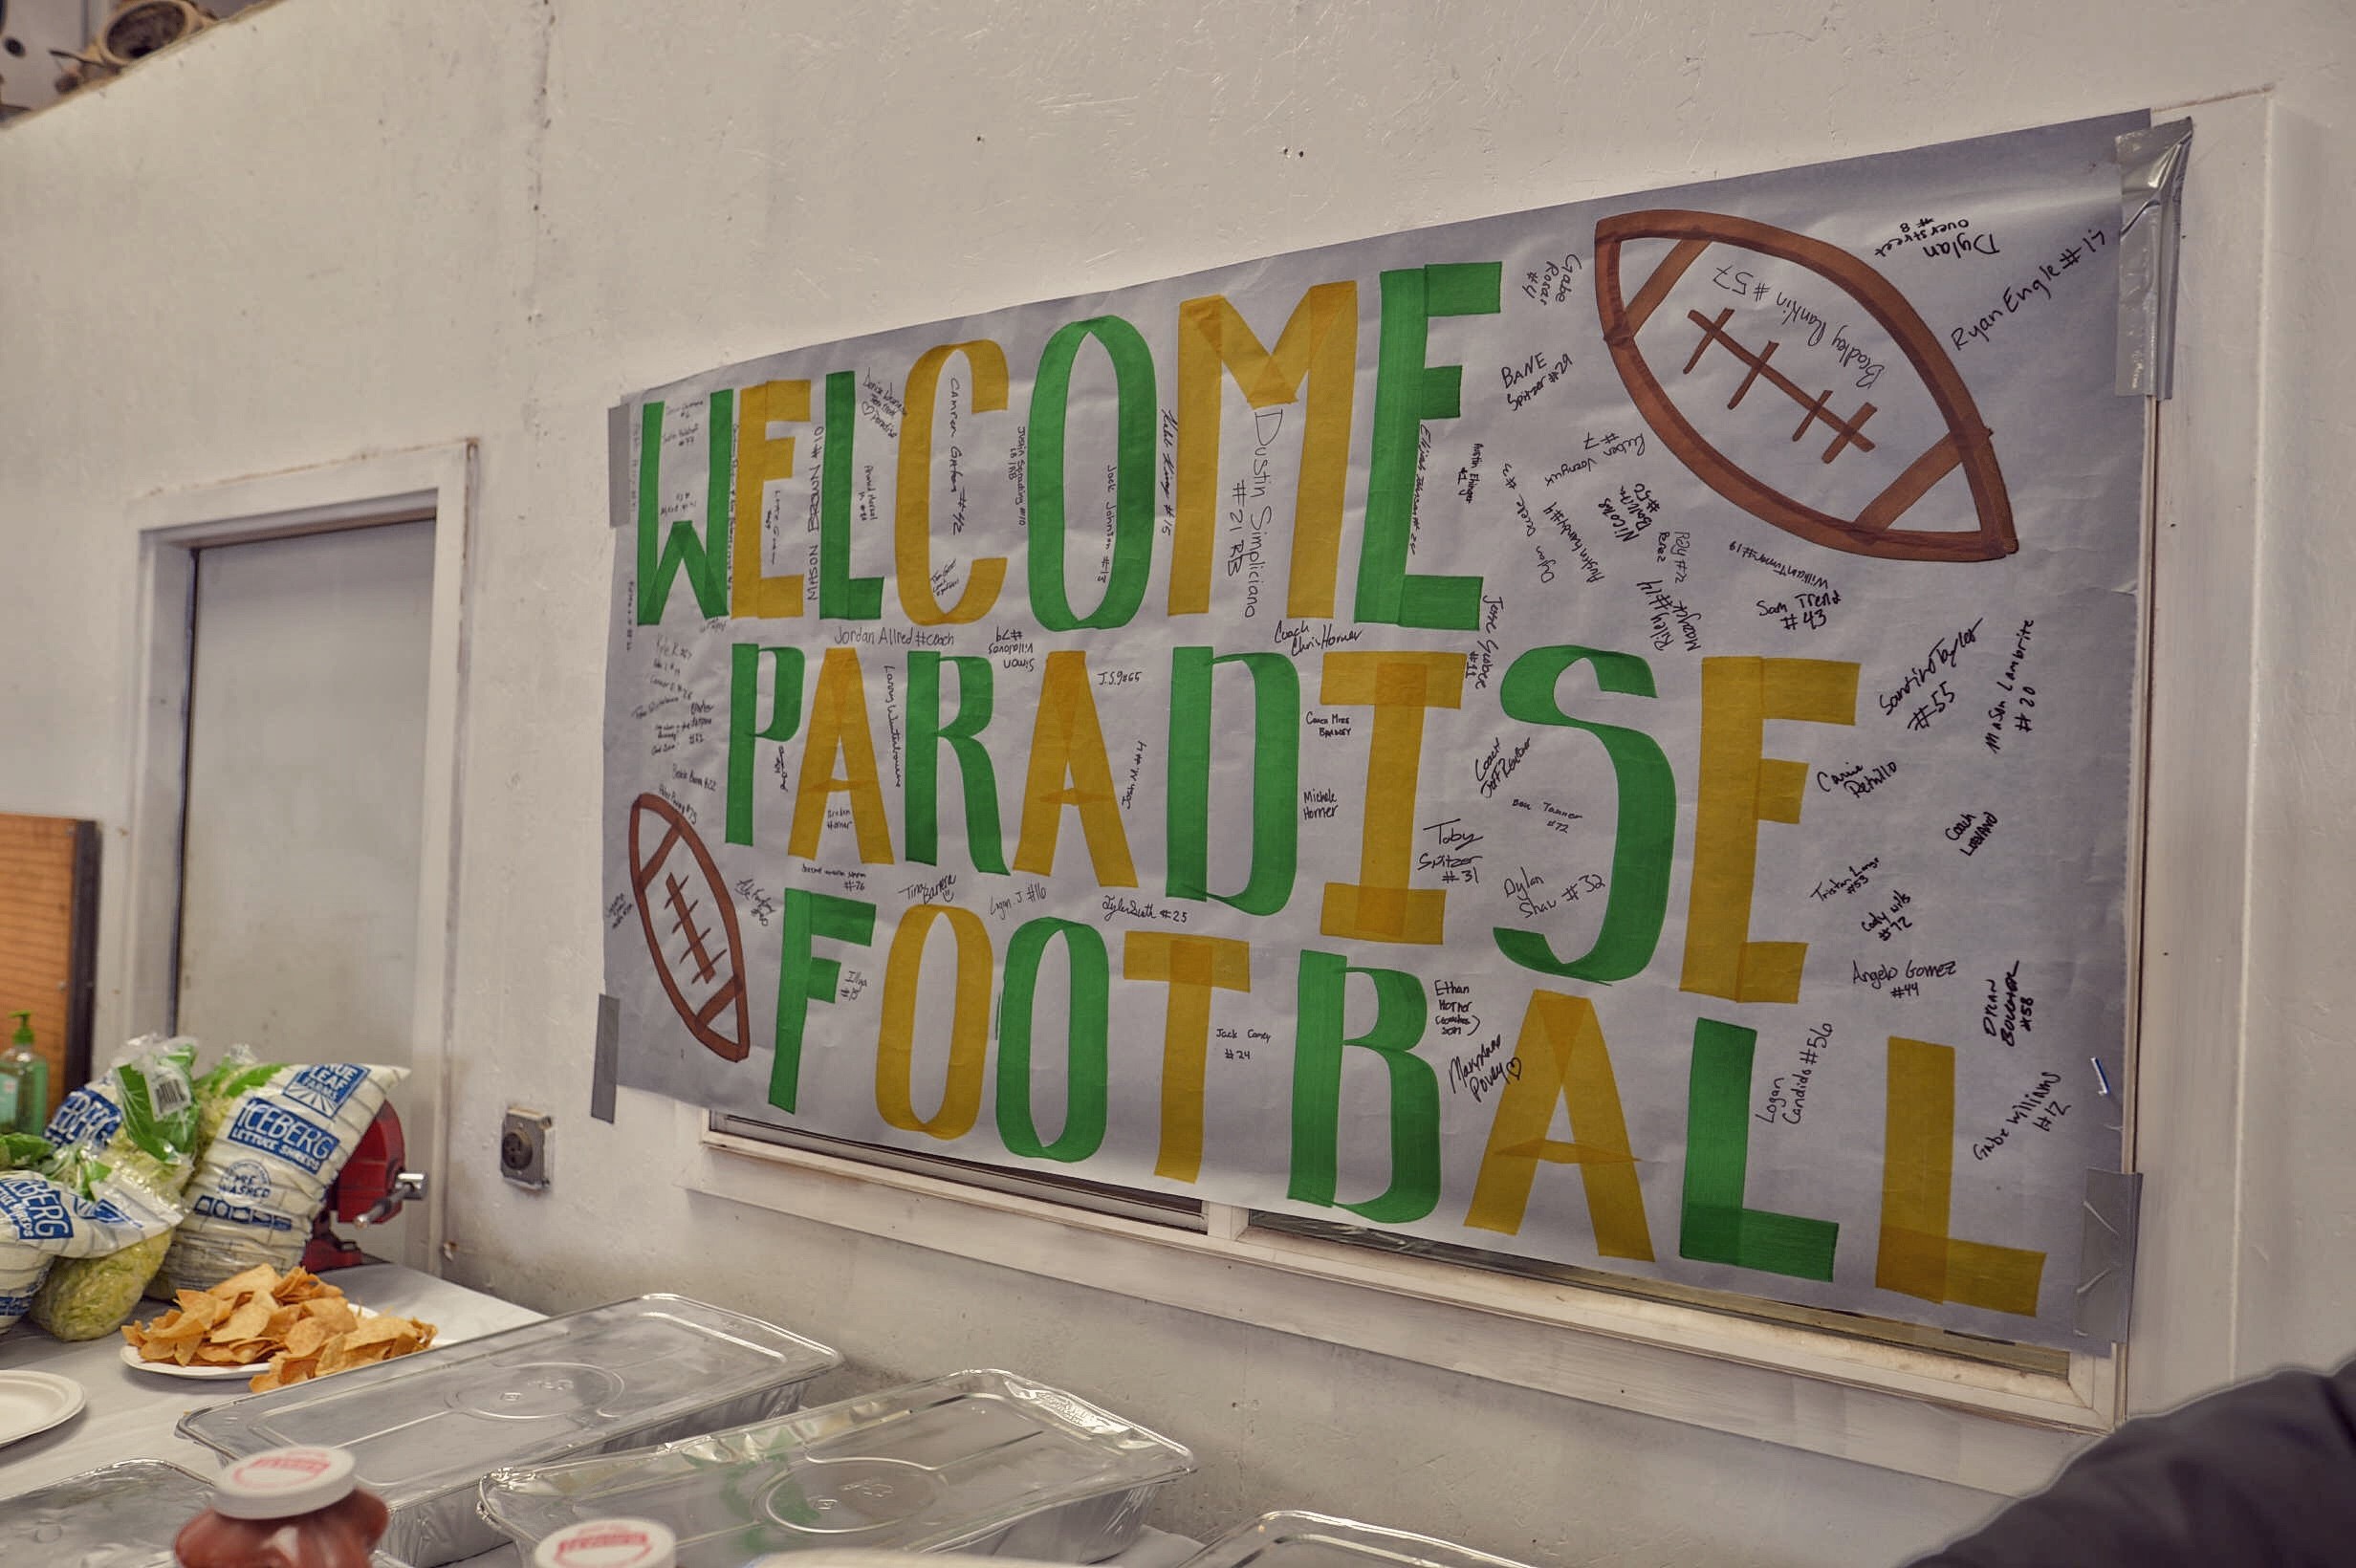 Paradise Undefeated: Football Team Becomes Symbol Of Hope In Recovering Community